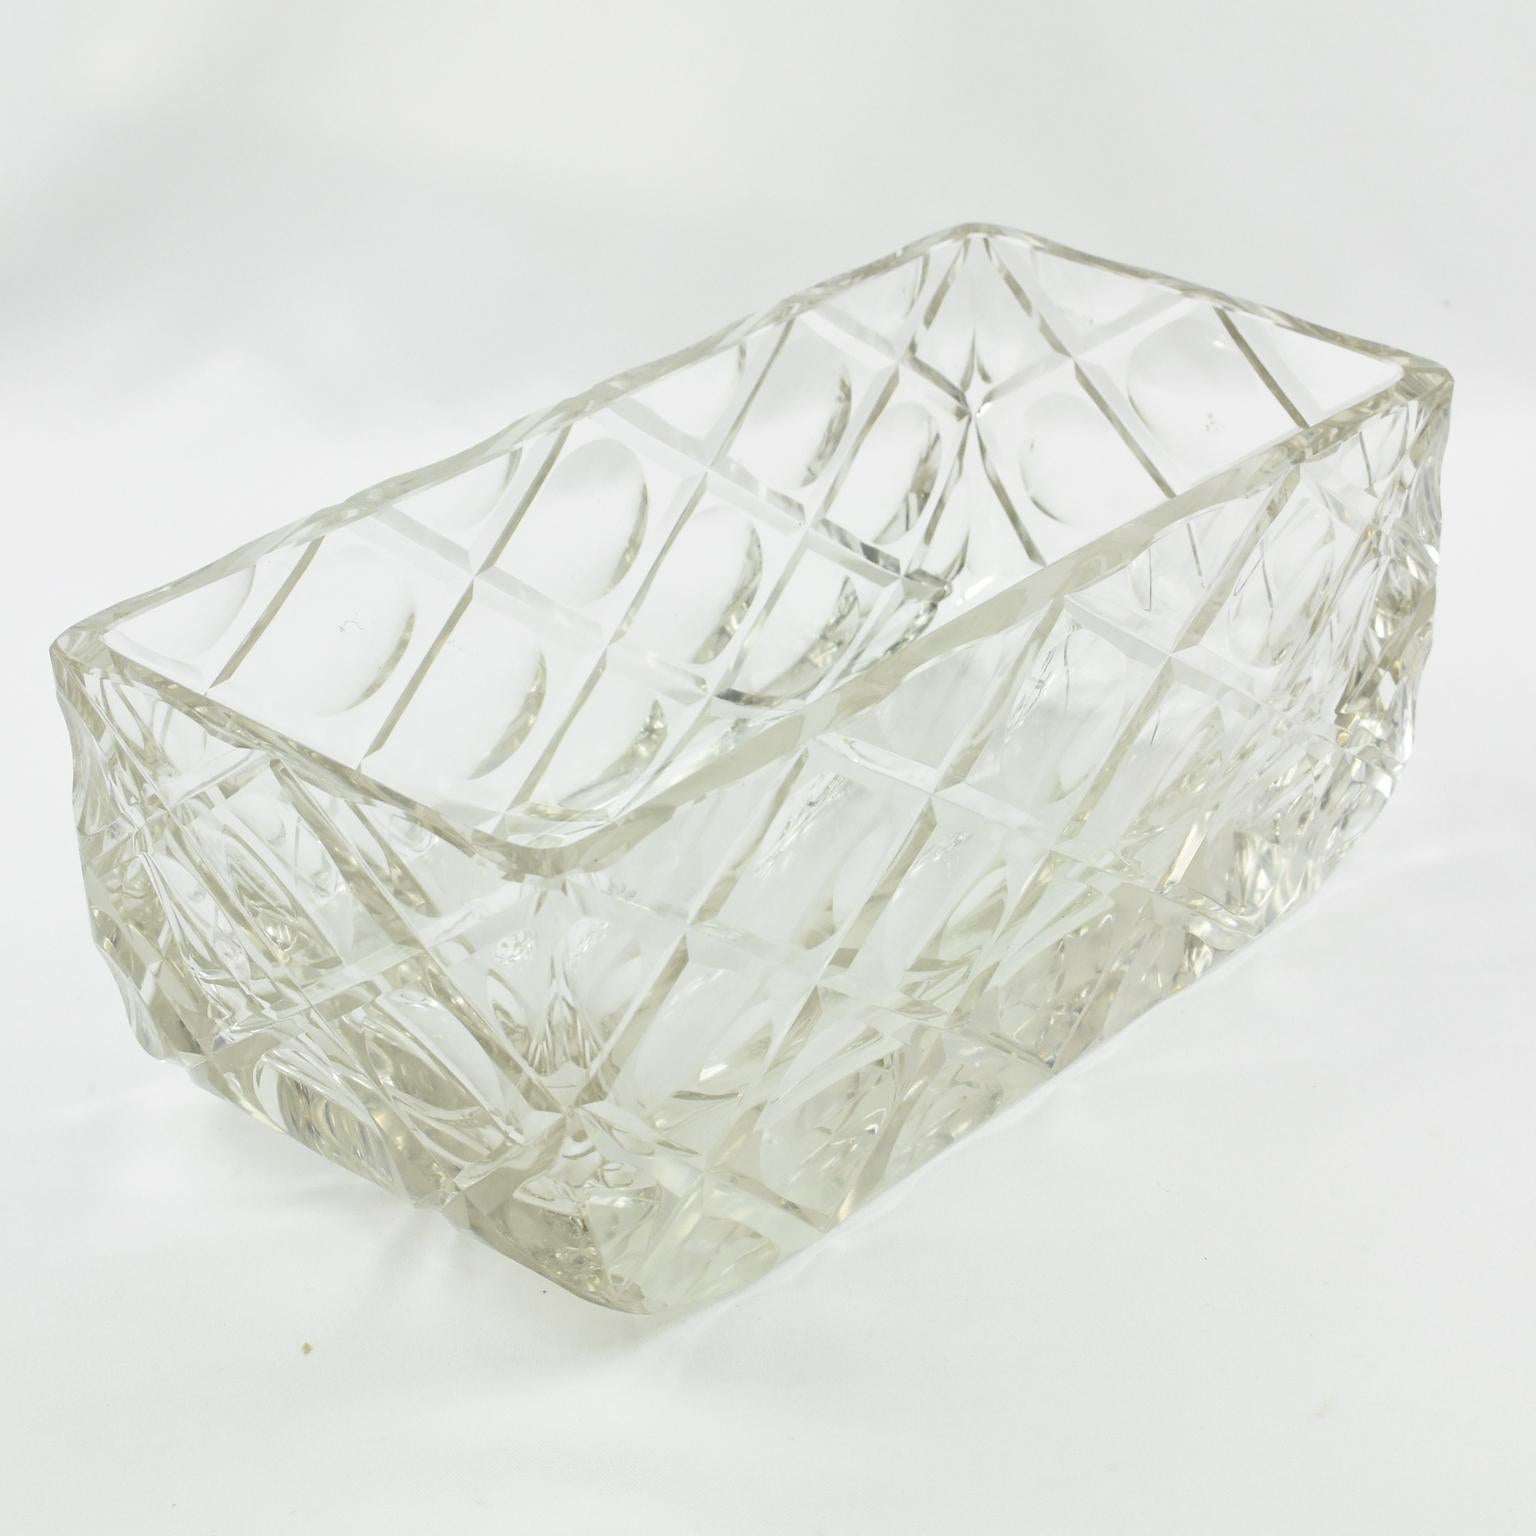 French Art Deco Etched Crystal Centerpiece Decorative Bowl, France 1930s For Sale